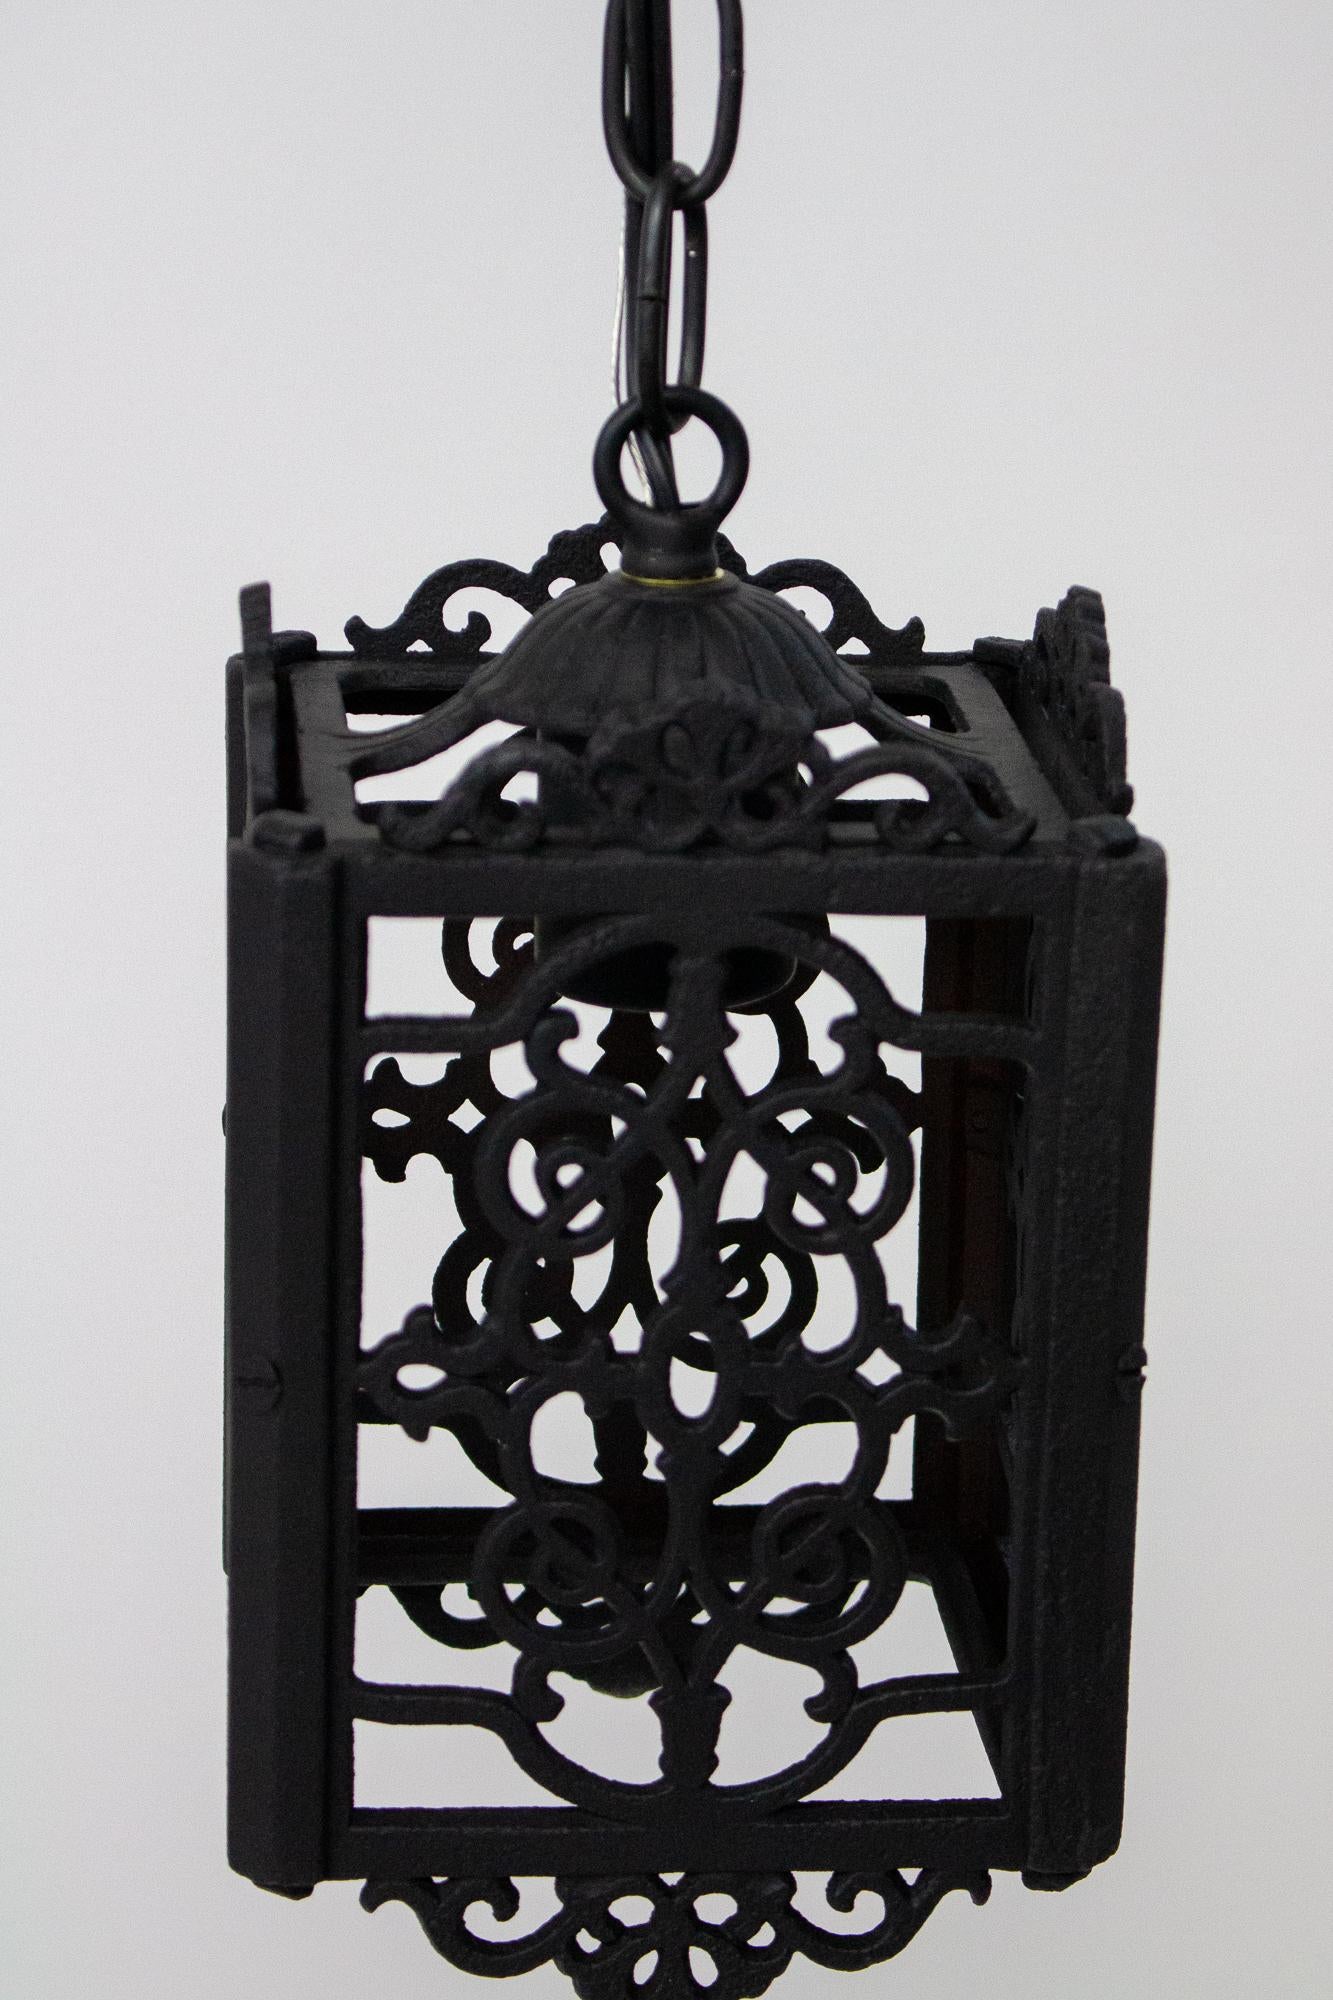 Square cast iron lantern. The panels have a cutout pattern and ornate top and bottom edges. The corners are beveled. Has been cleaned and repainted black. No glass, for interior use only. Rewired for use in the United States, a single porcelain